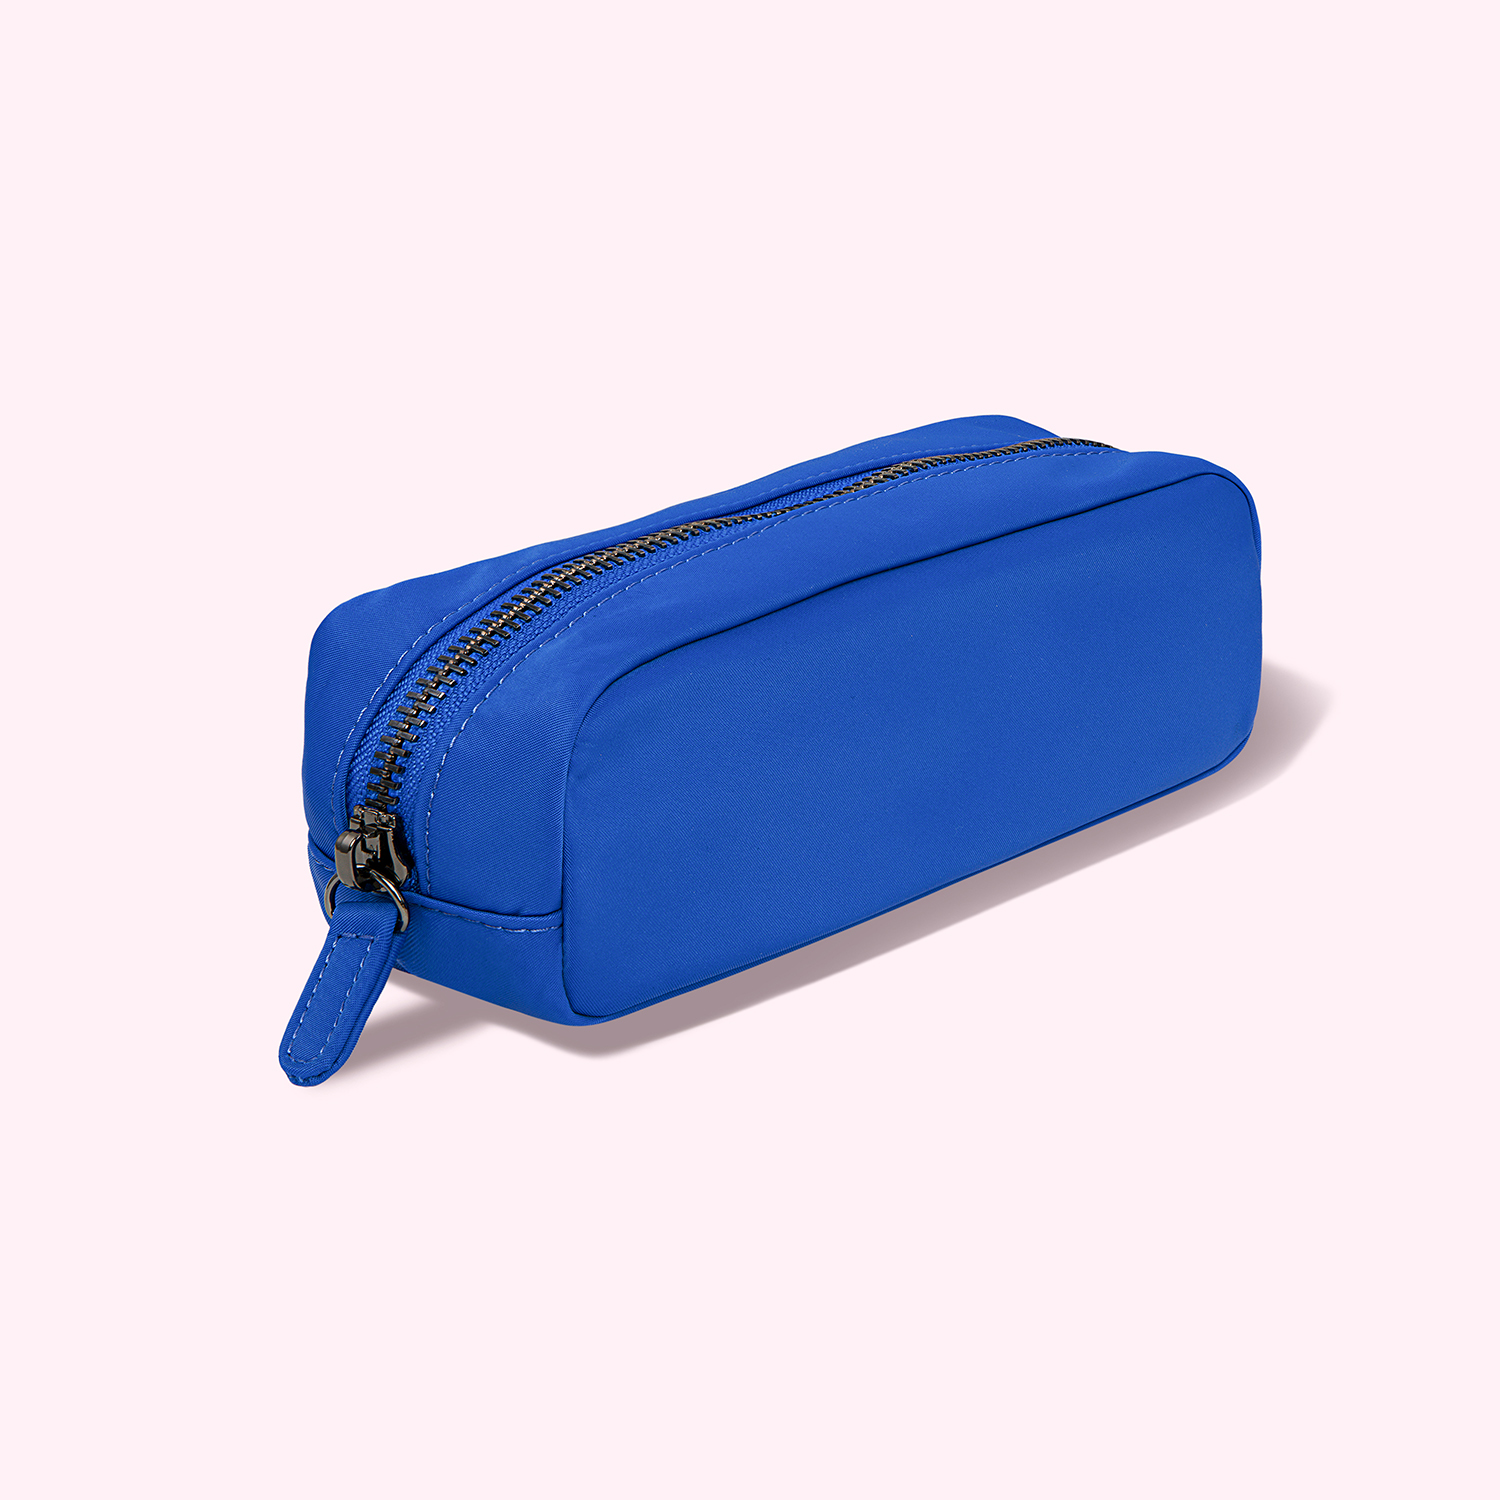 Pencil Cases and Pouches